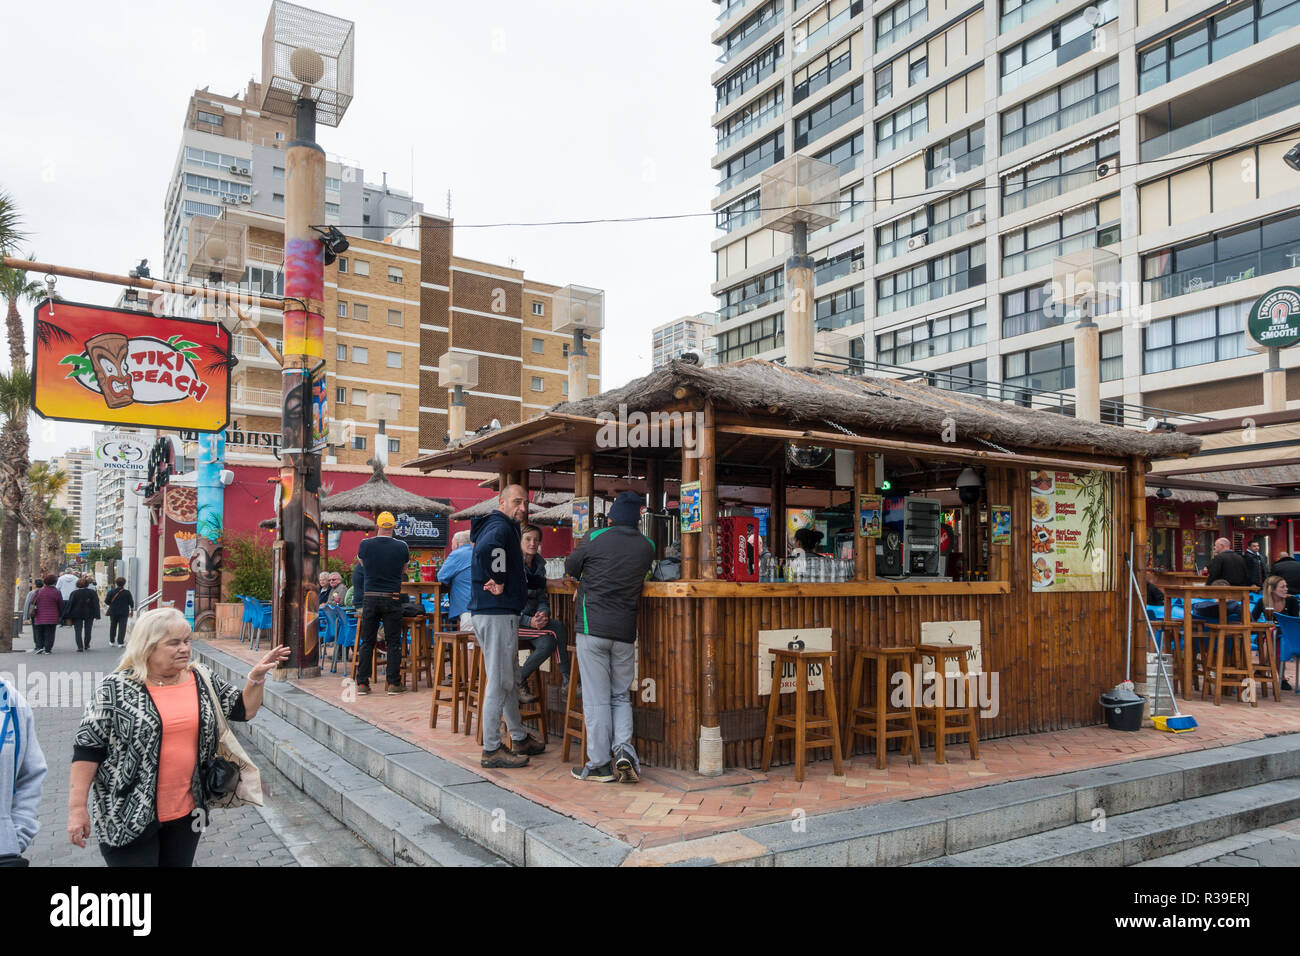 Benidorm, Costa Blanca, Spain, 22nd November 2018. Despite reports in the British press that complaints of anti-social behaviour have forced the closure of this popular tourist bar on Levante Beach, the Tiki Bar is pictured here today, trading as usual. Credit: Mick Flynn/Alamy Live News Stock Photo